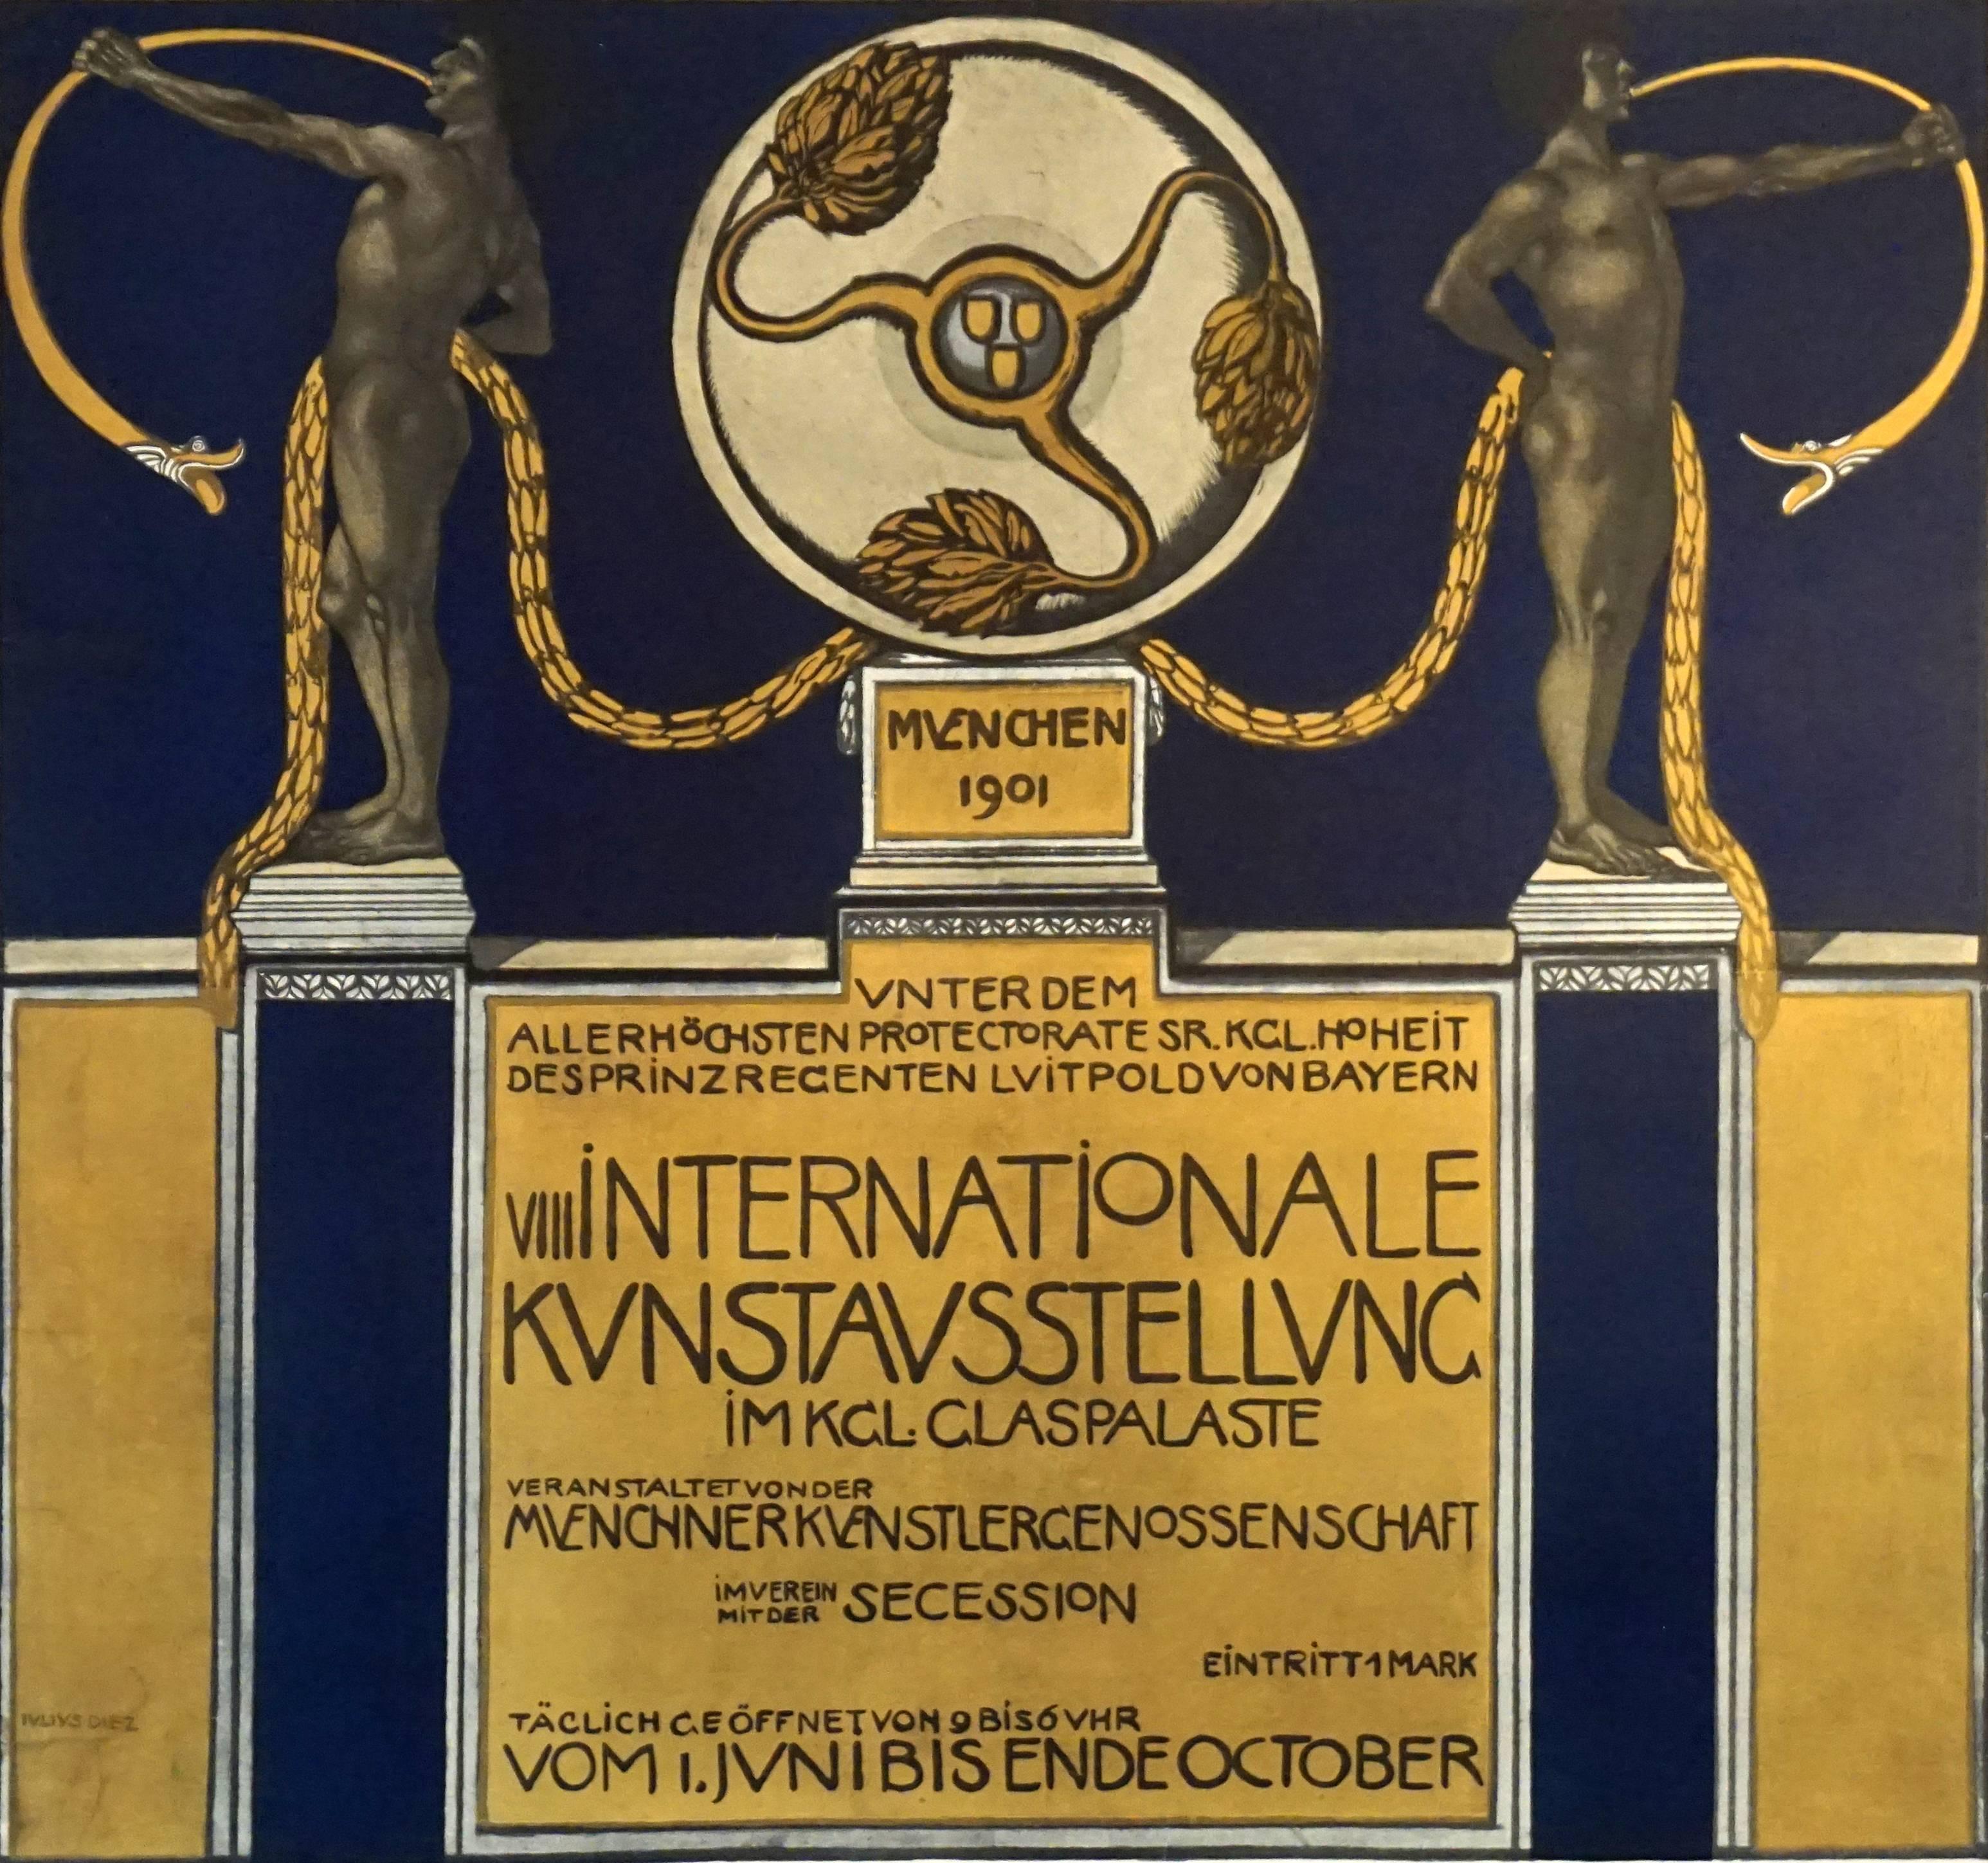 This is a rare and exquisitely made Vienna Secession period exhibition poster for Internationale Kunstausstellung by Julius Diez, 1901. The poster announces an International Art Exhibition, in October 1901, Munich, and gives various details about